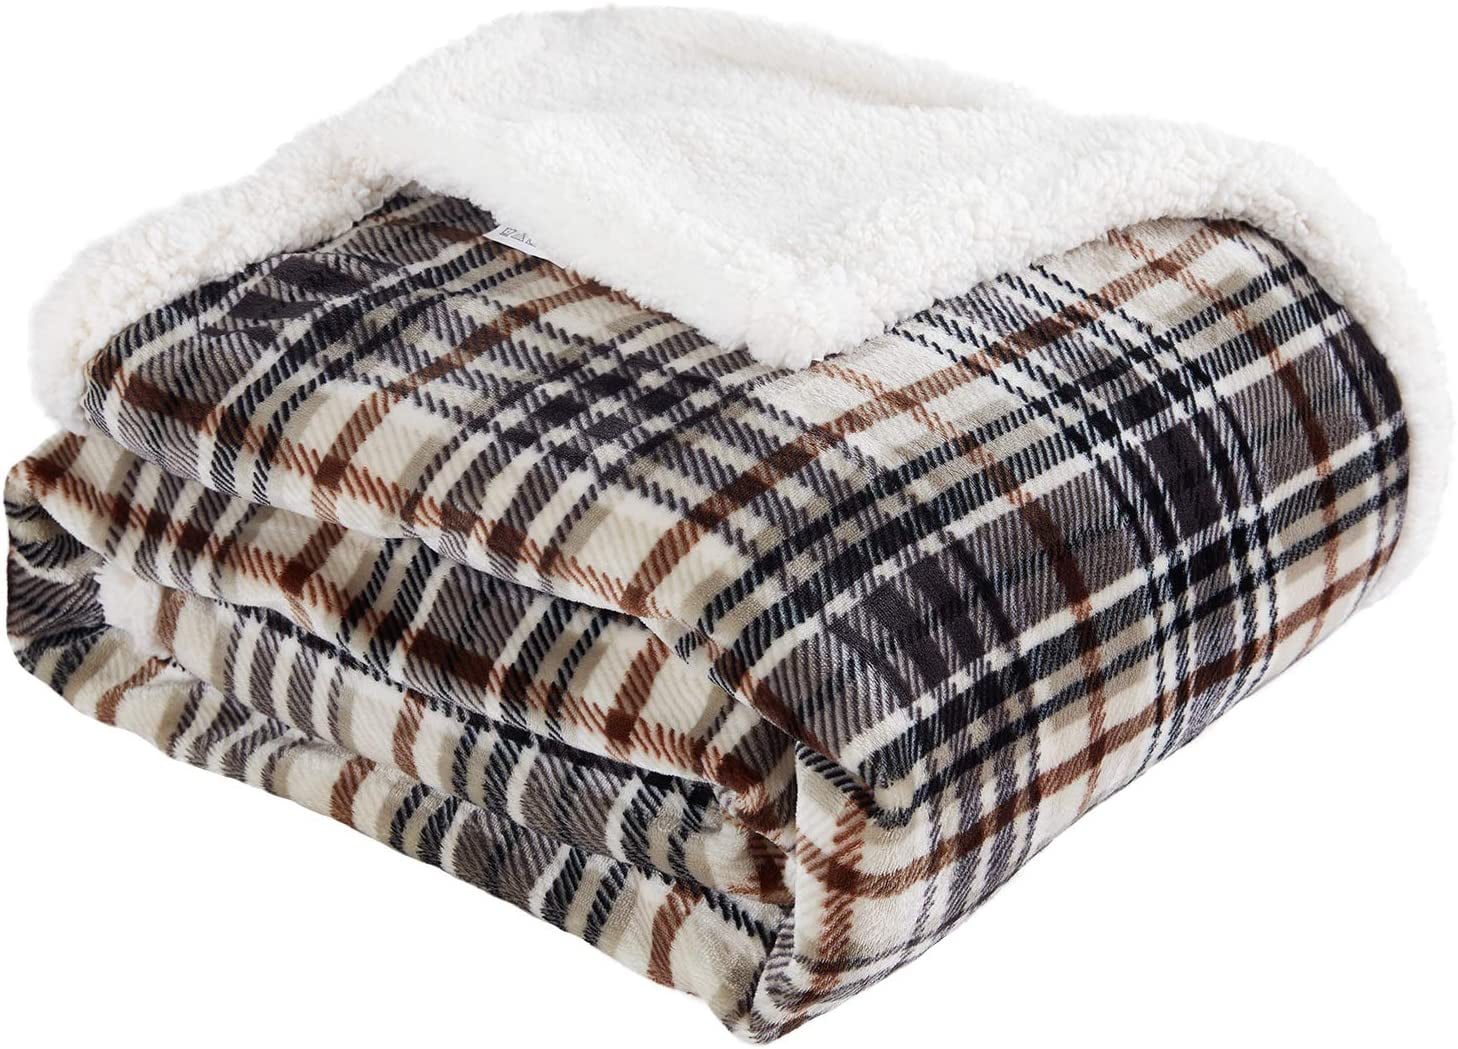 Black, Double Flannel Fleece Sherpa Throws Blankets Large Soft Warm with Free Gift 